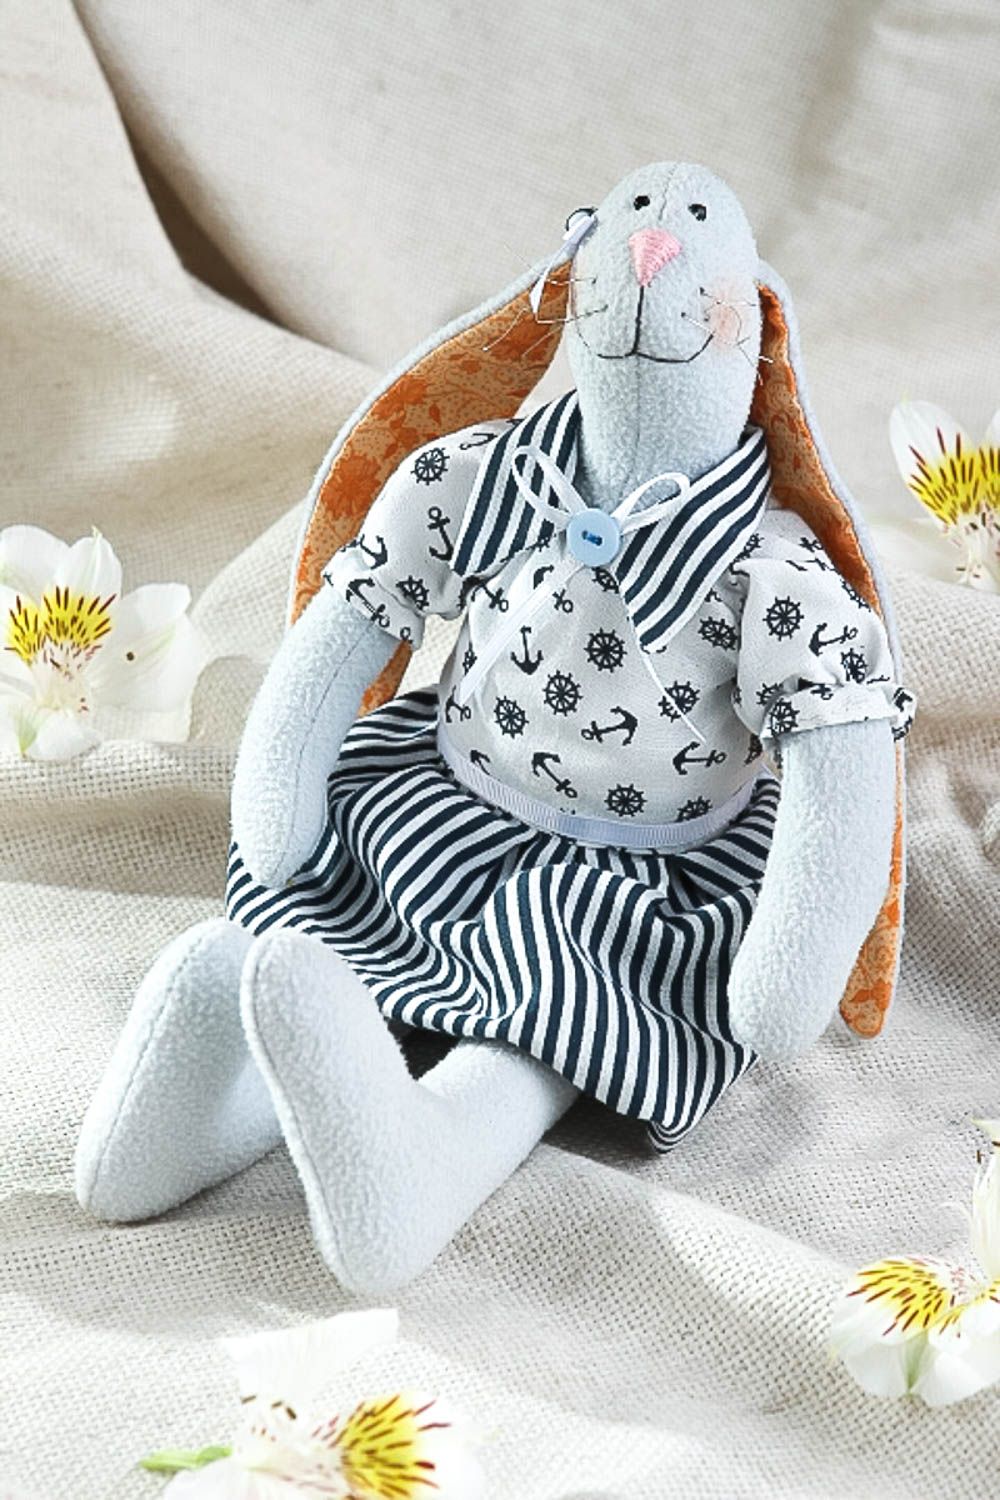 Handmade soft toy cool bedrooms stuffed interior toy decorative use only photo 1